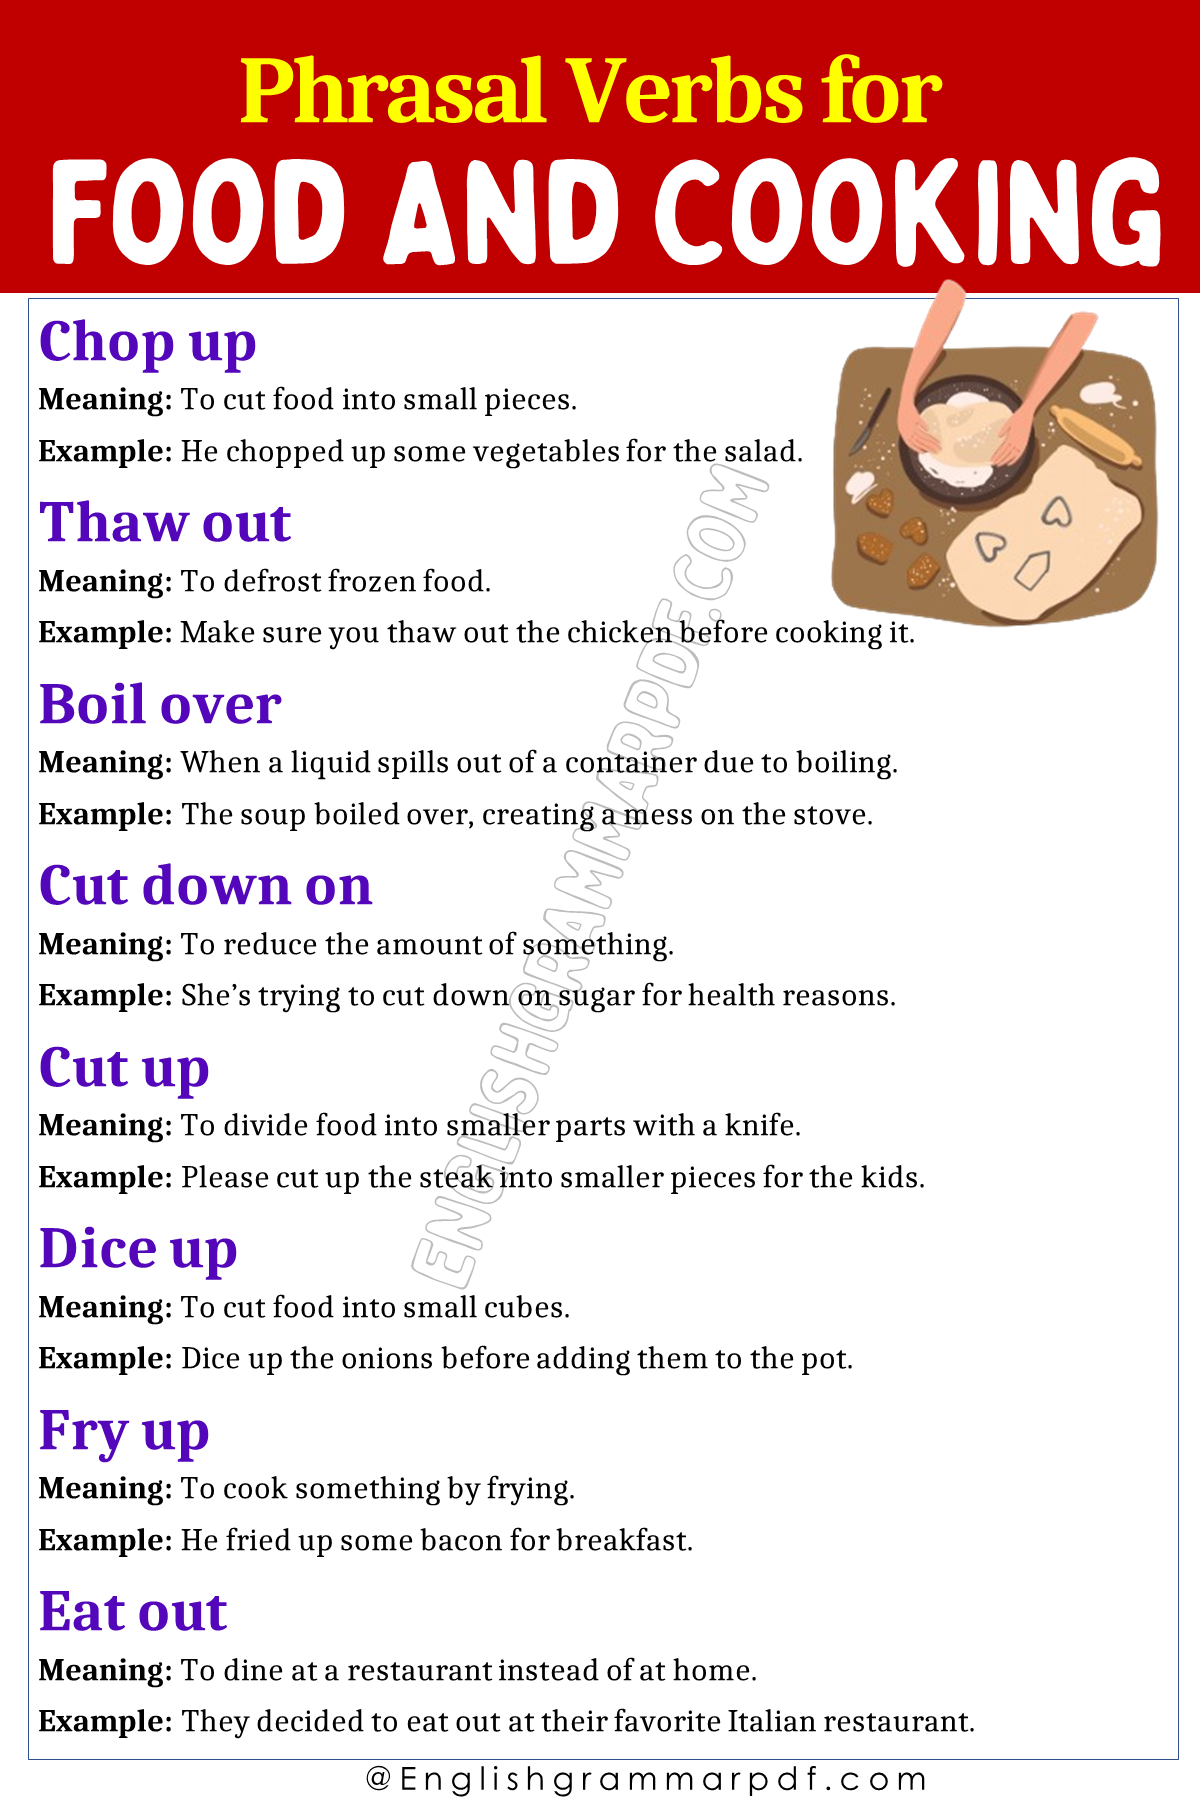 Phrasal Verbs Related To Food And Cooking